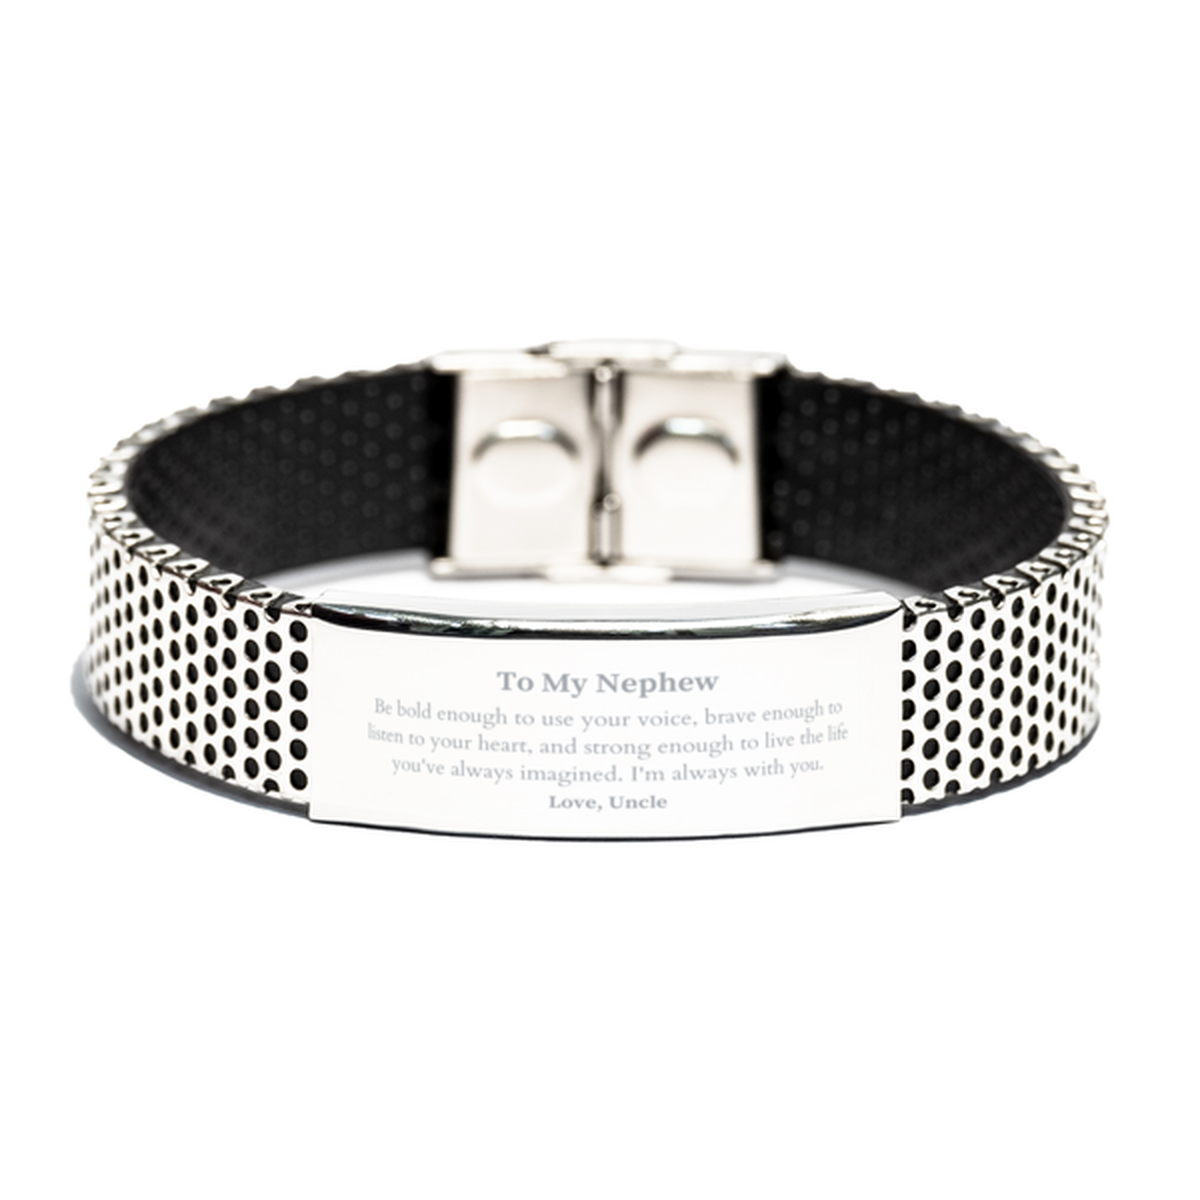 Keepsake Nephew Stainless Steel Bracelet Gift Idea Graduation Christmas Birthday Nephew from Uncle, Nephew Be bold enough to use your voice, brave enough to listen to your heart. Love, Uncle